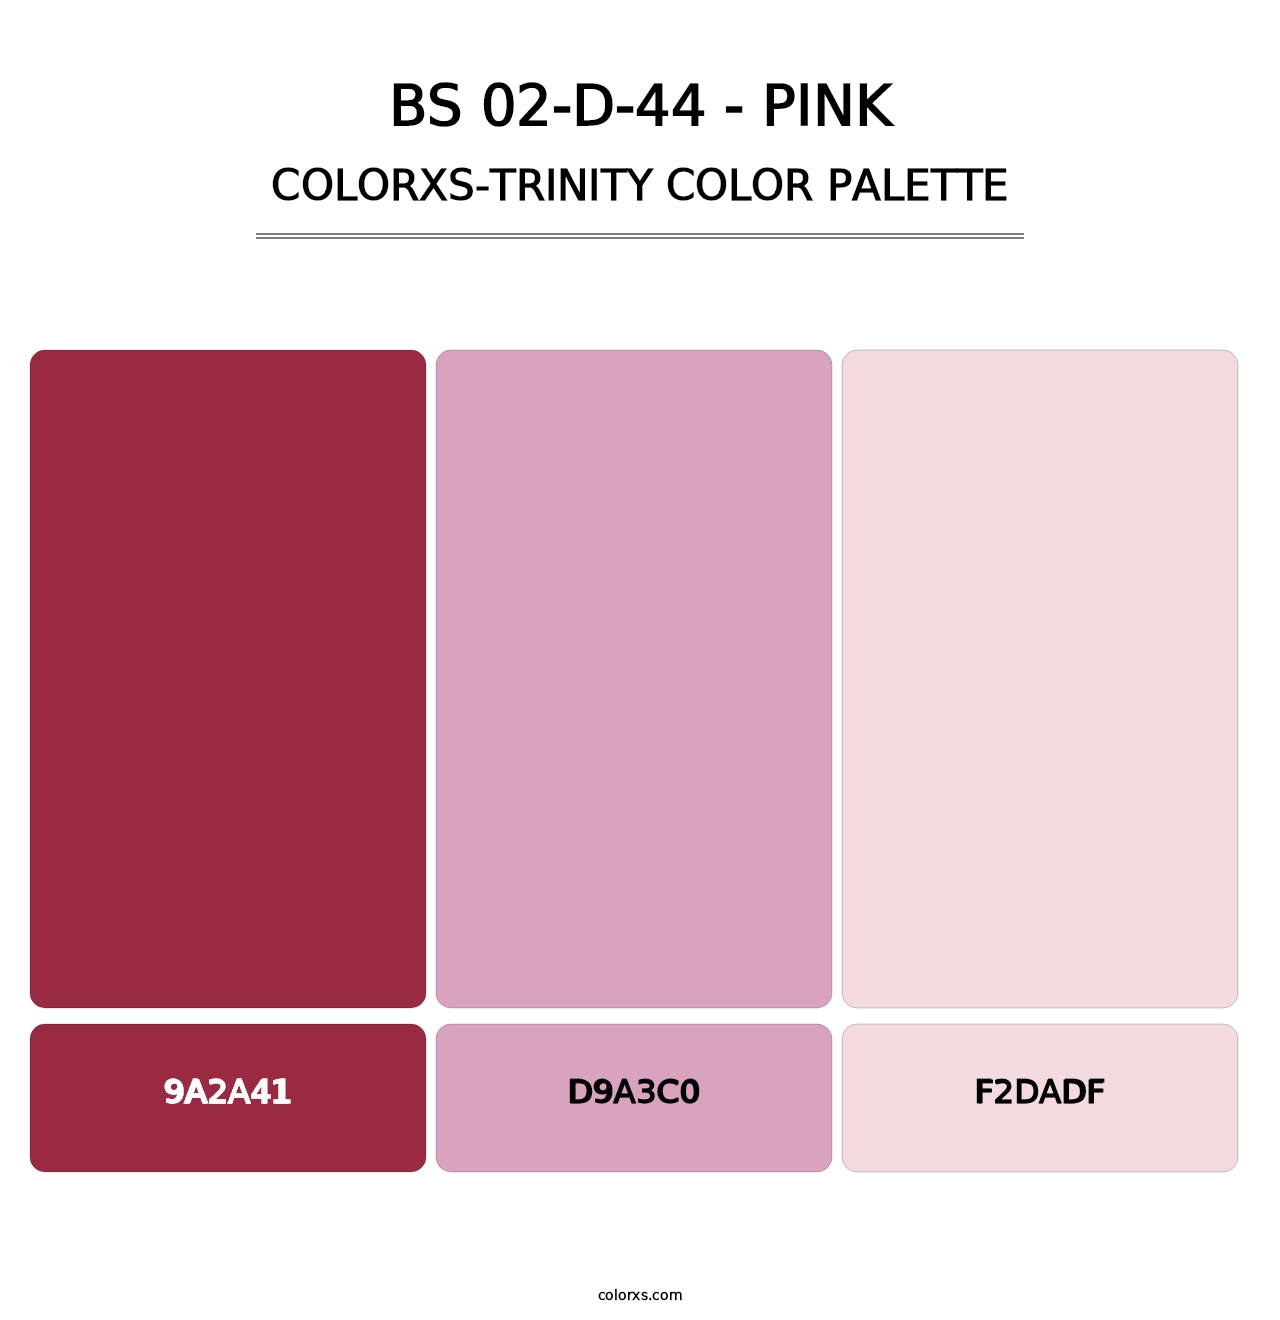 BS 02-D-44 - Pink - Colorxs Trinity Palette